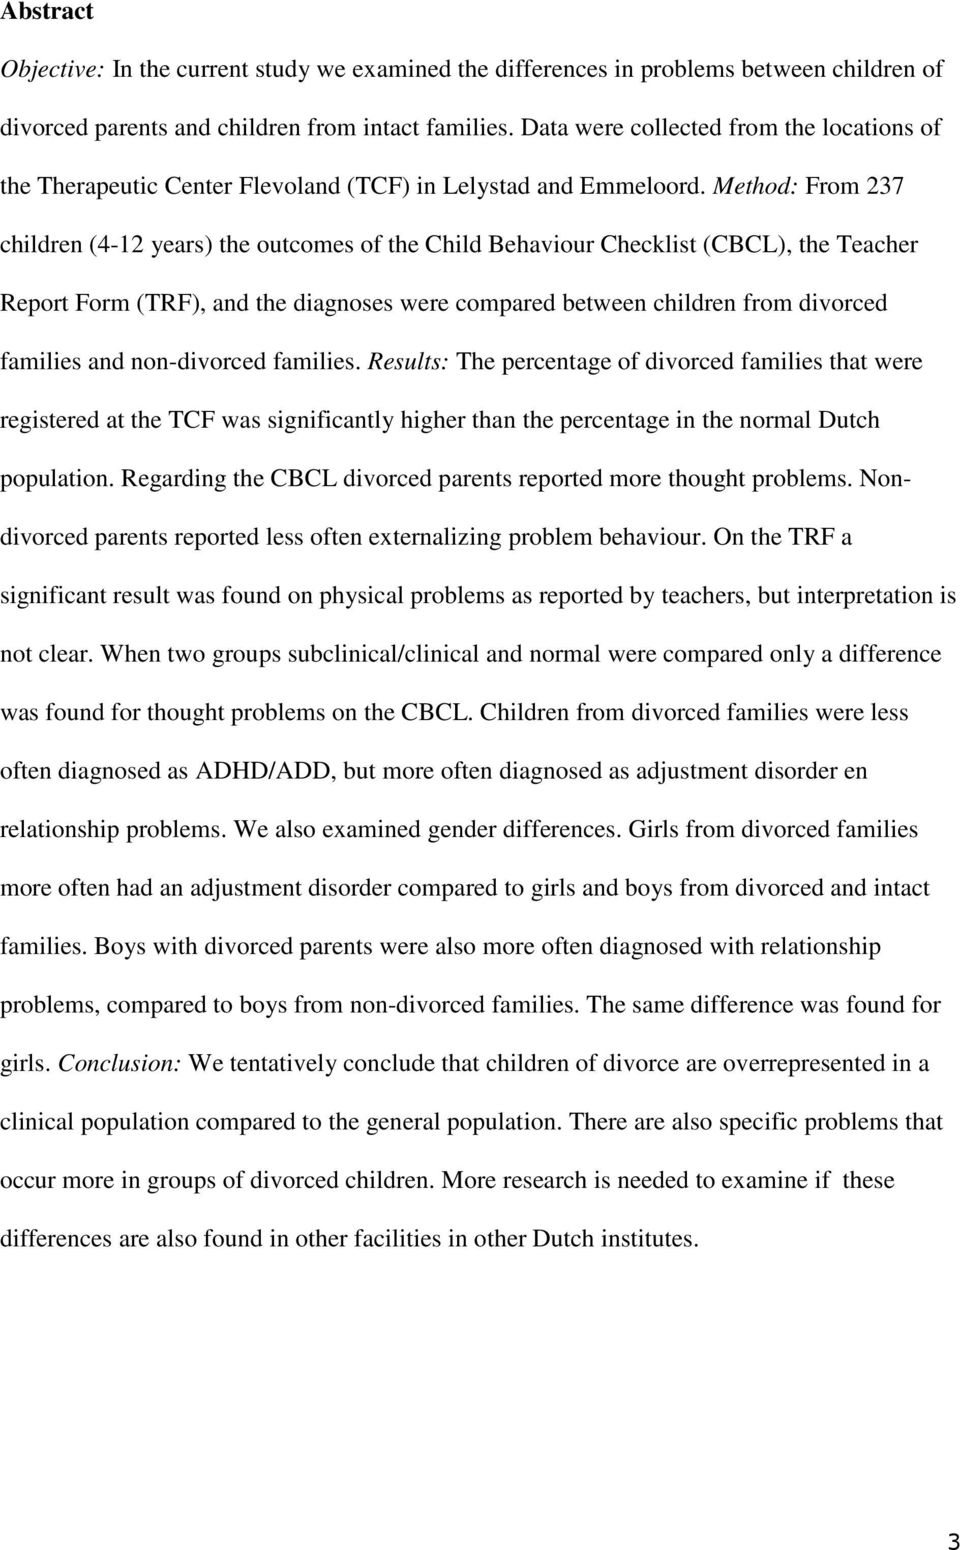 Method: From 237 children (4-12 years) the outcomes of the Child Behaviour Checklist (CBCL), the Teacher Report Form (TRF), and the diagnoses were compared between children from divorced families and